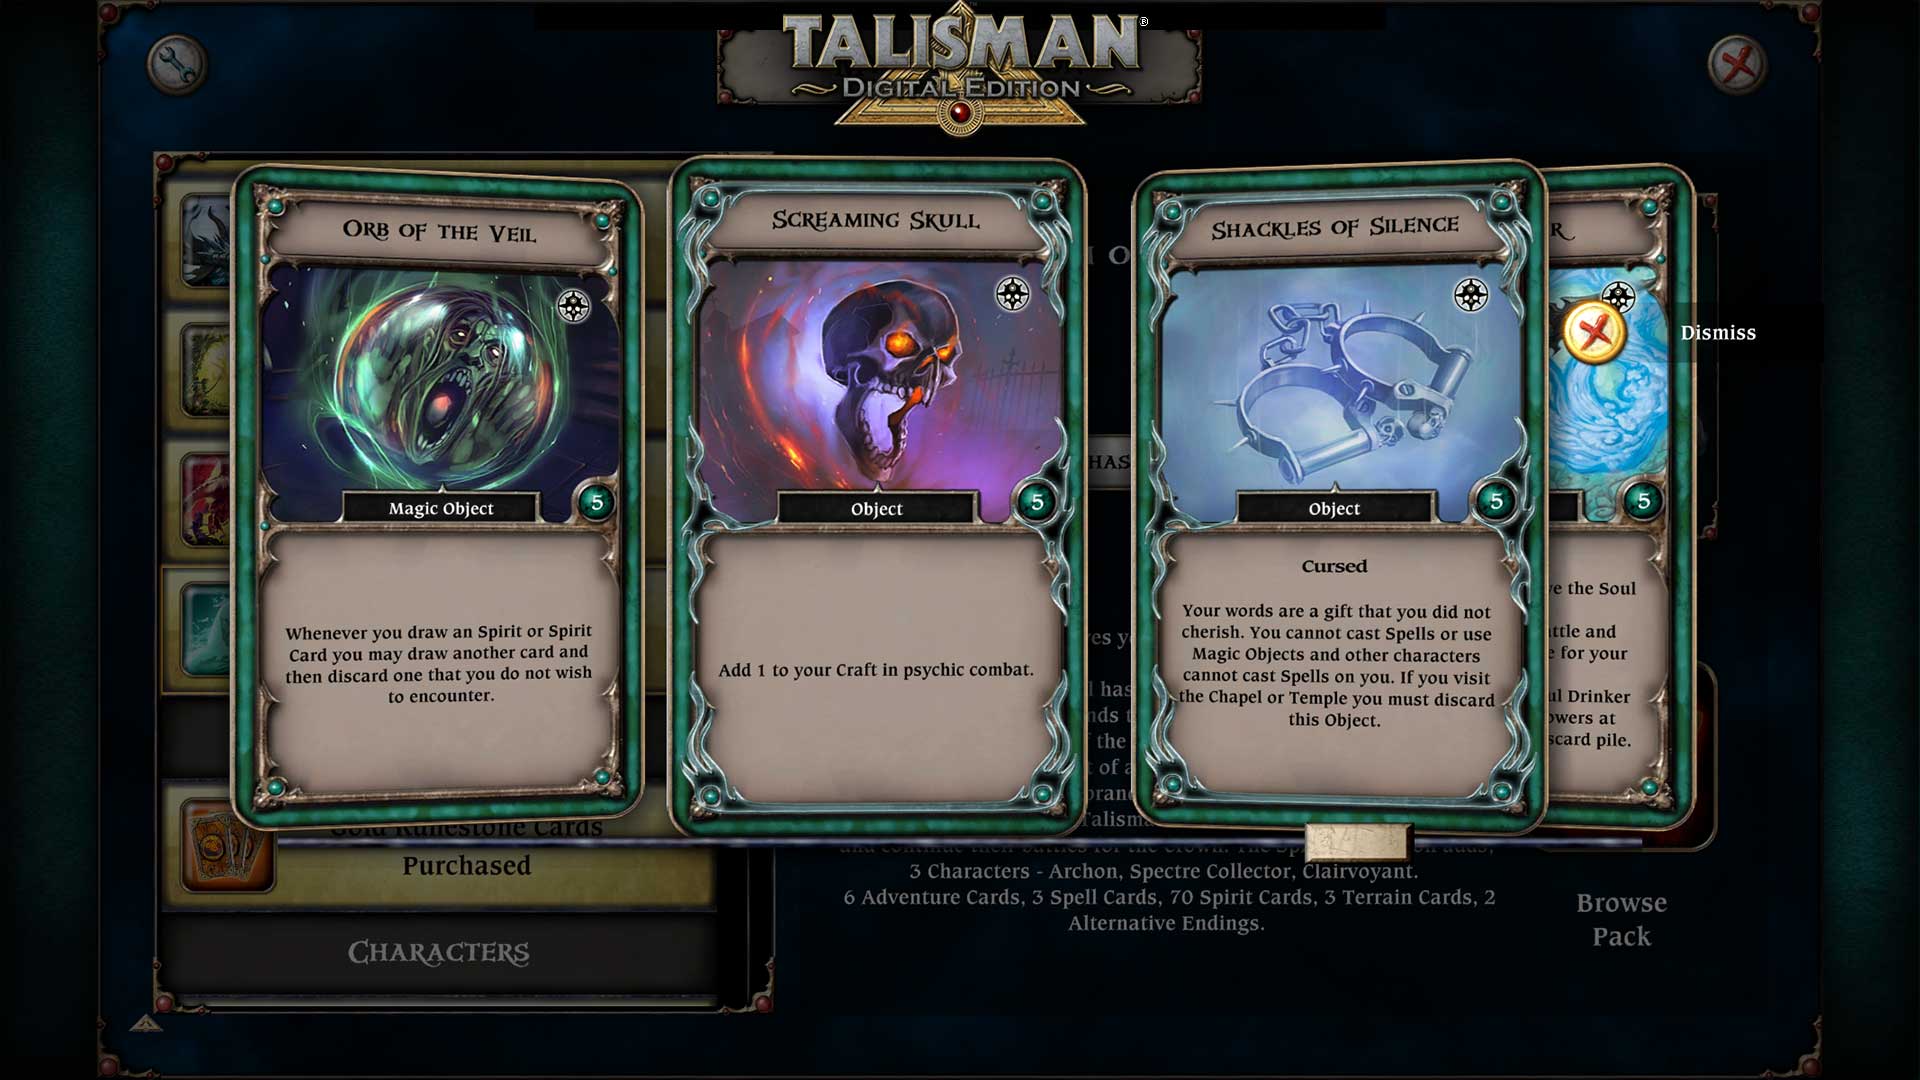 Talisman - The Realm of Souls Expansion DLC Steam CD Key 2.16 $